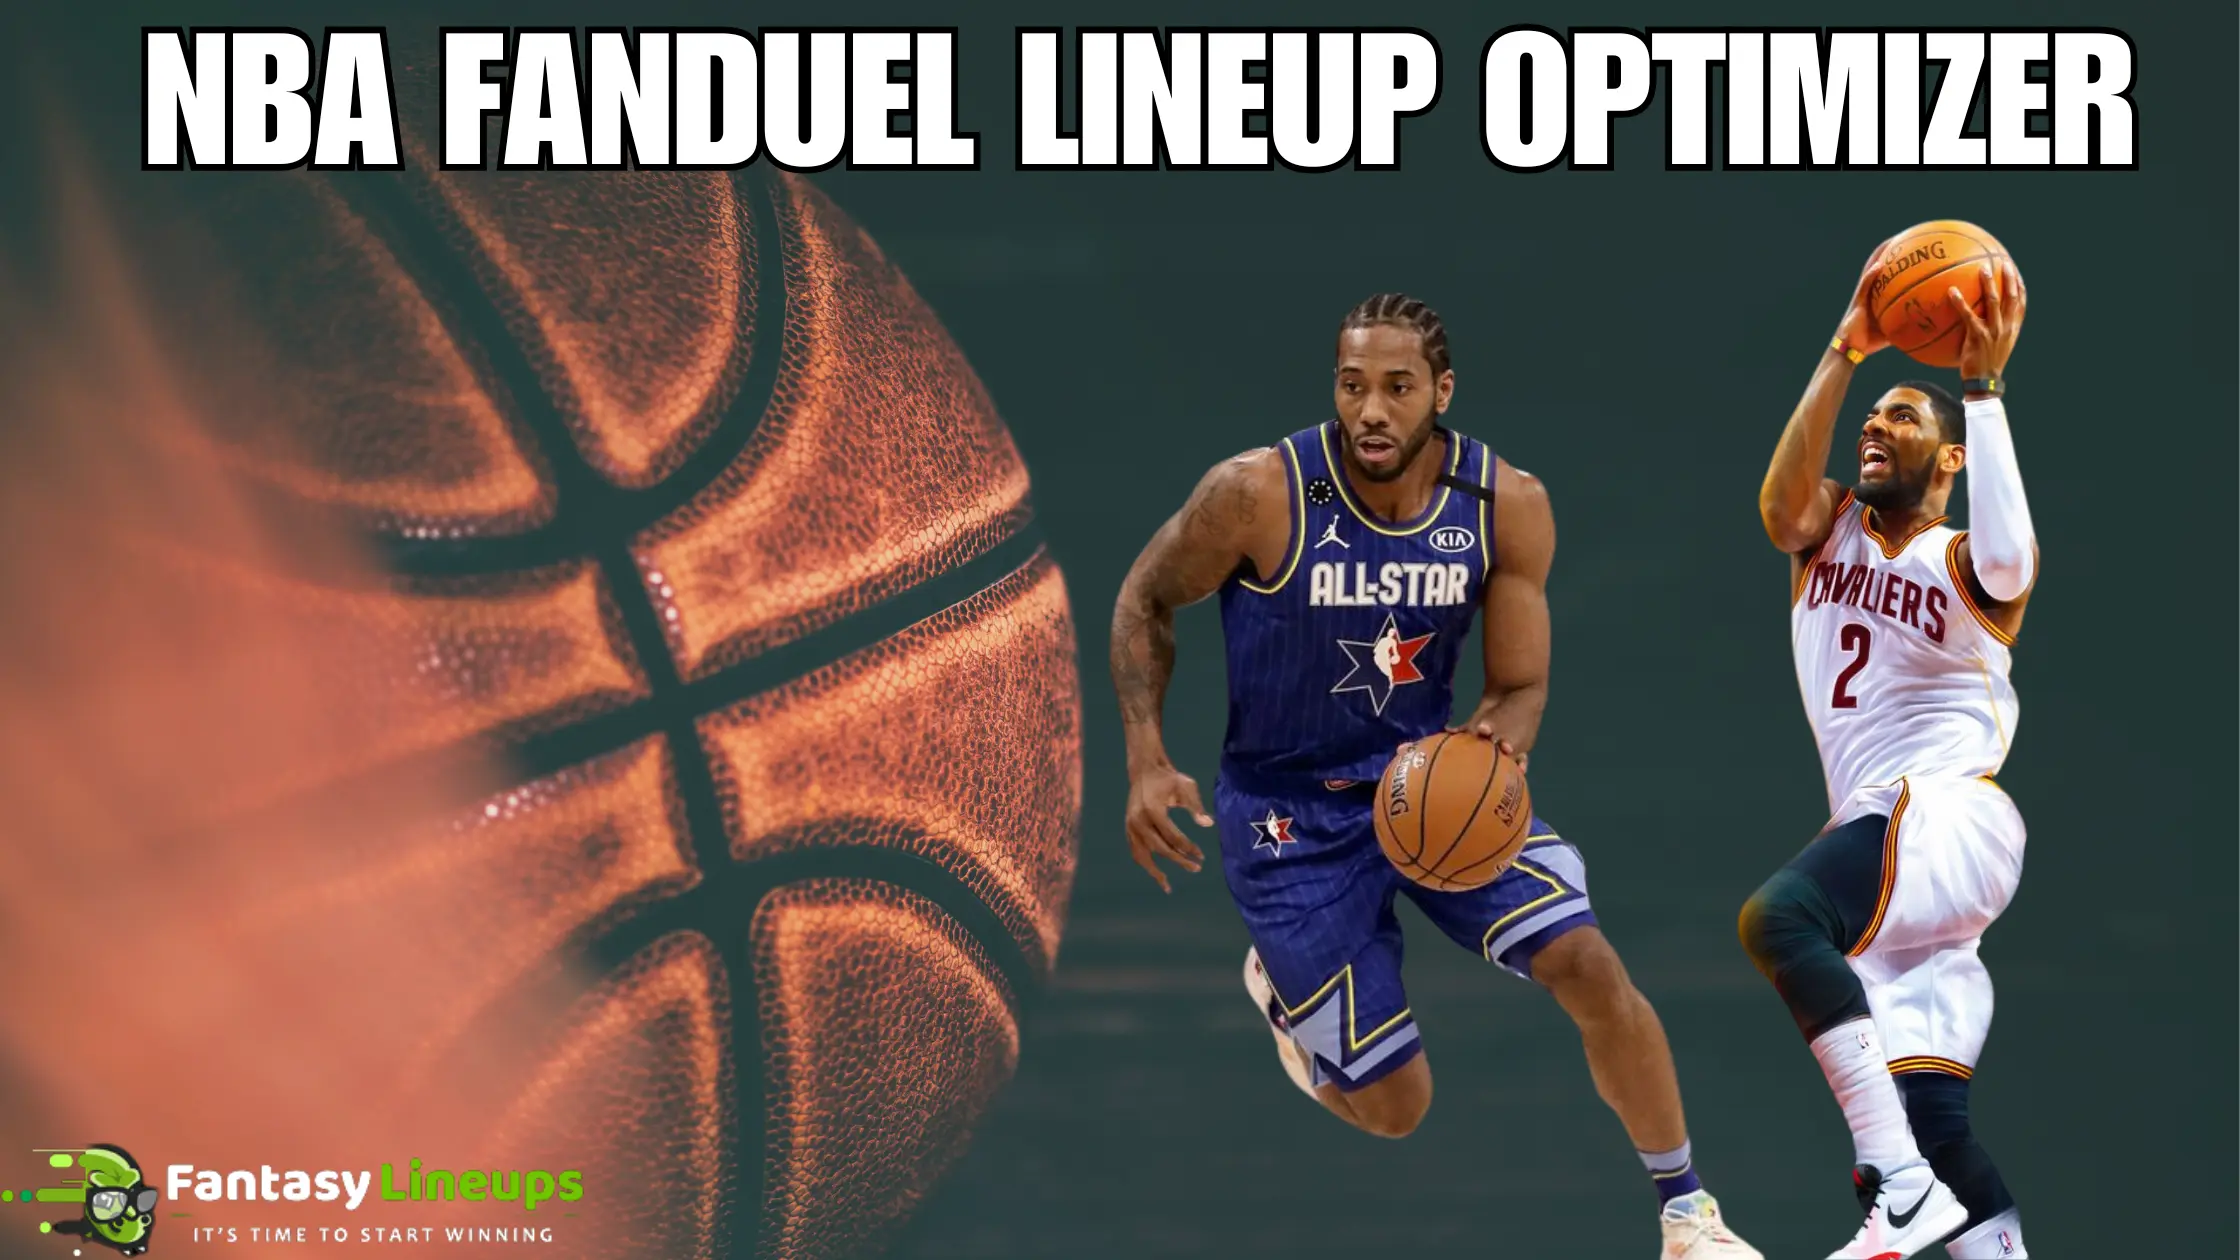 Learning Your Game with the NBA FanDuel Lineup Optimizer